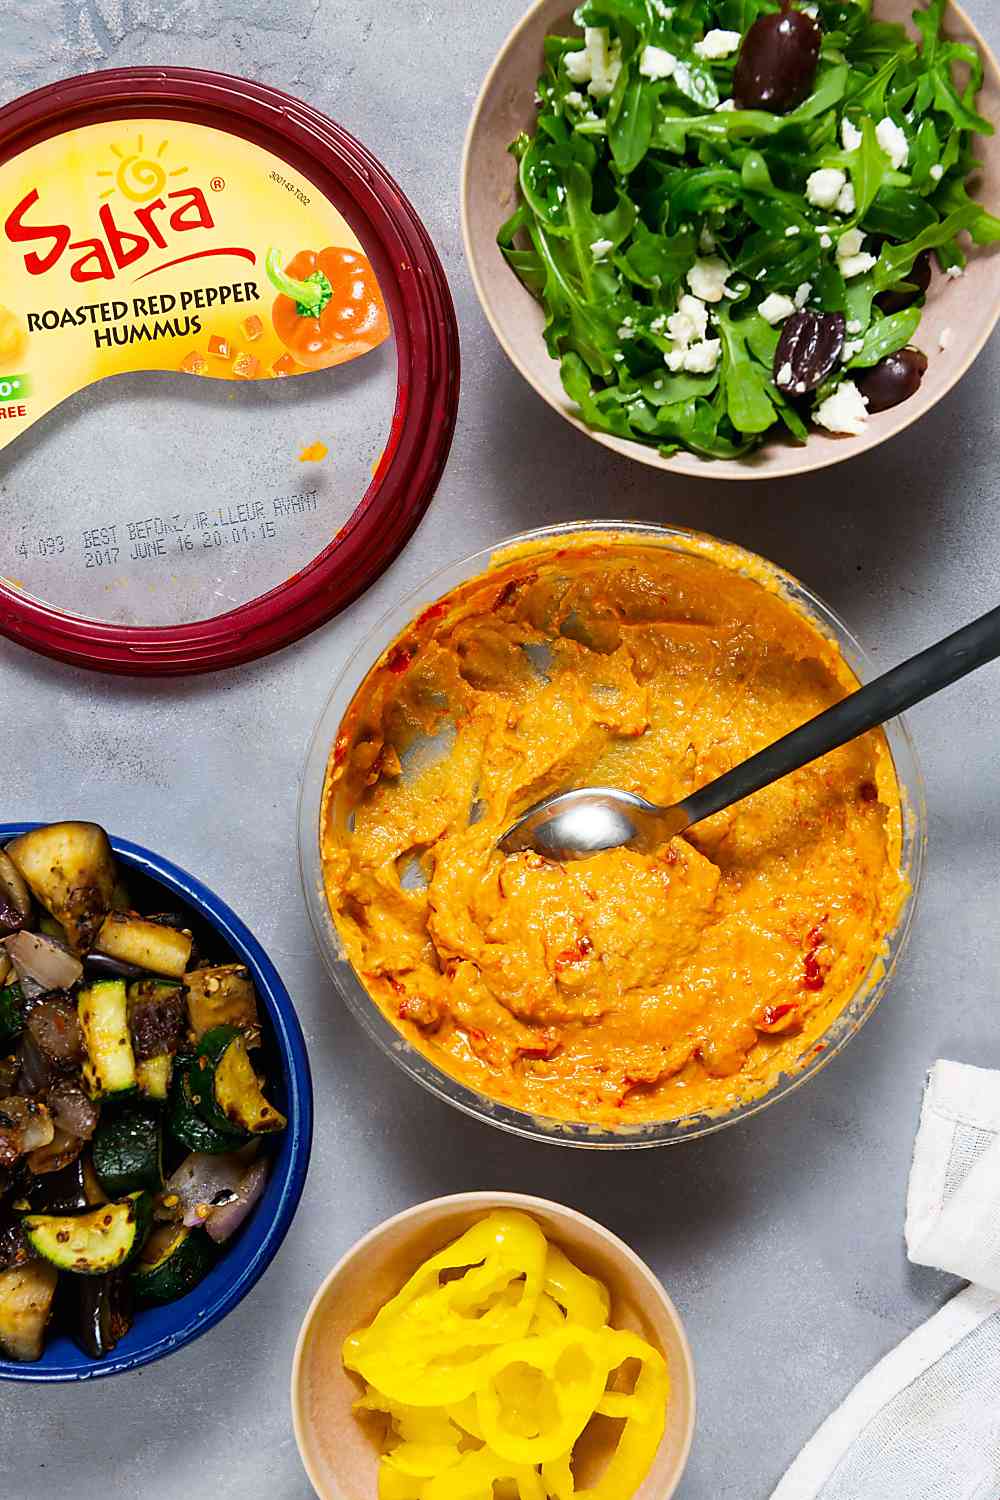 Roasted Red Pepper Hummus Photo